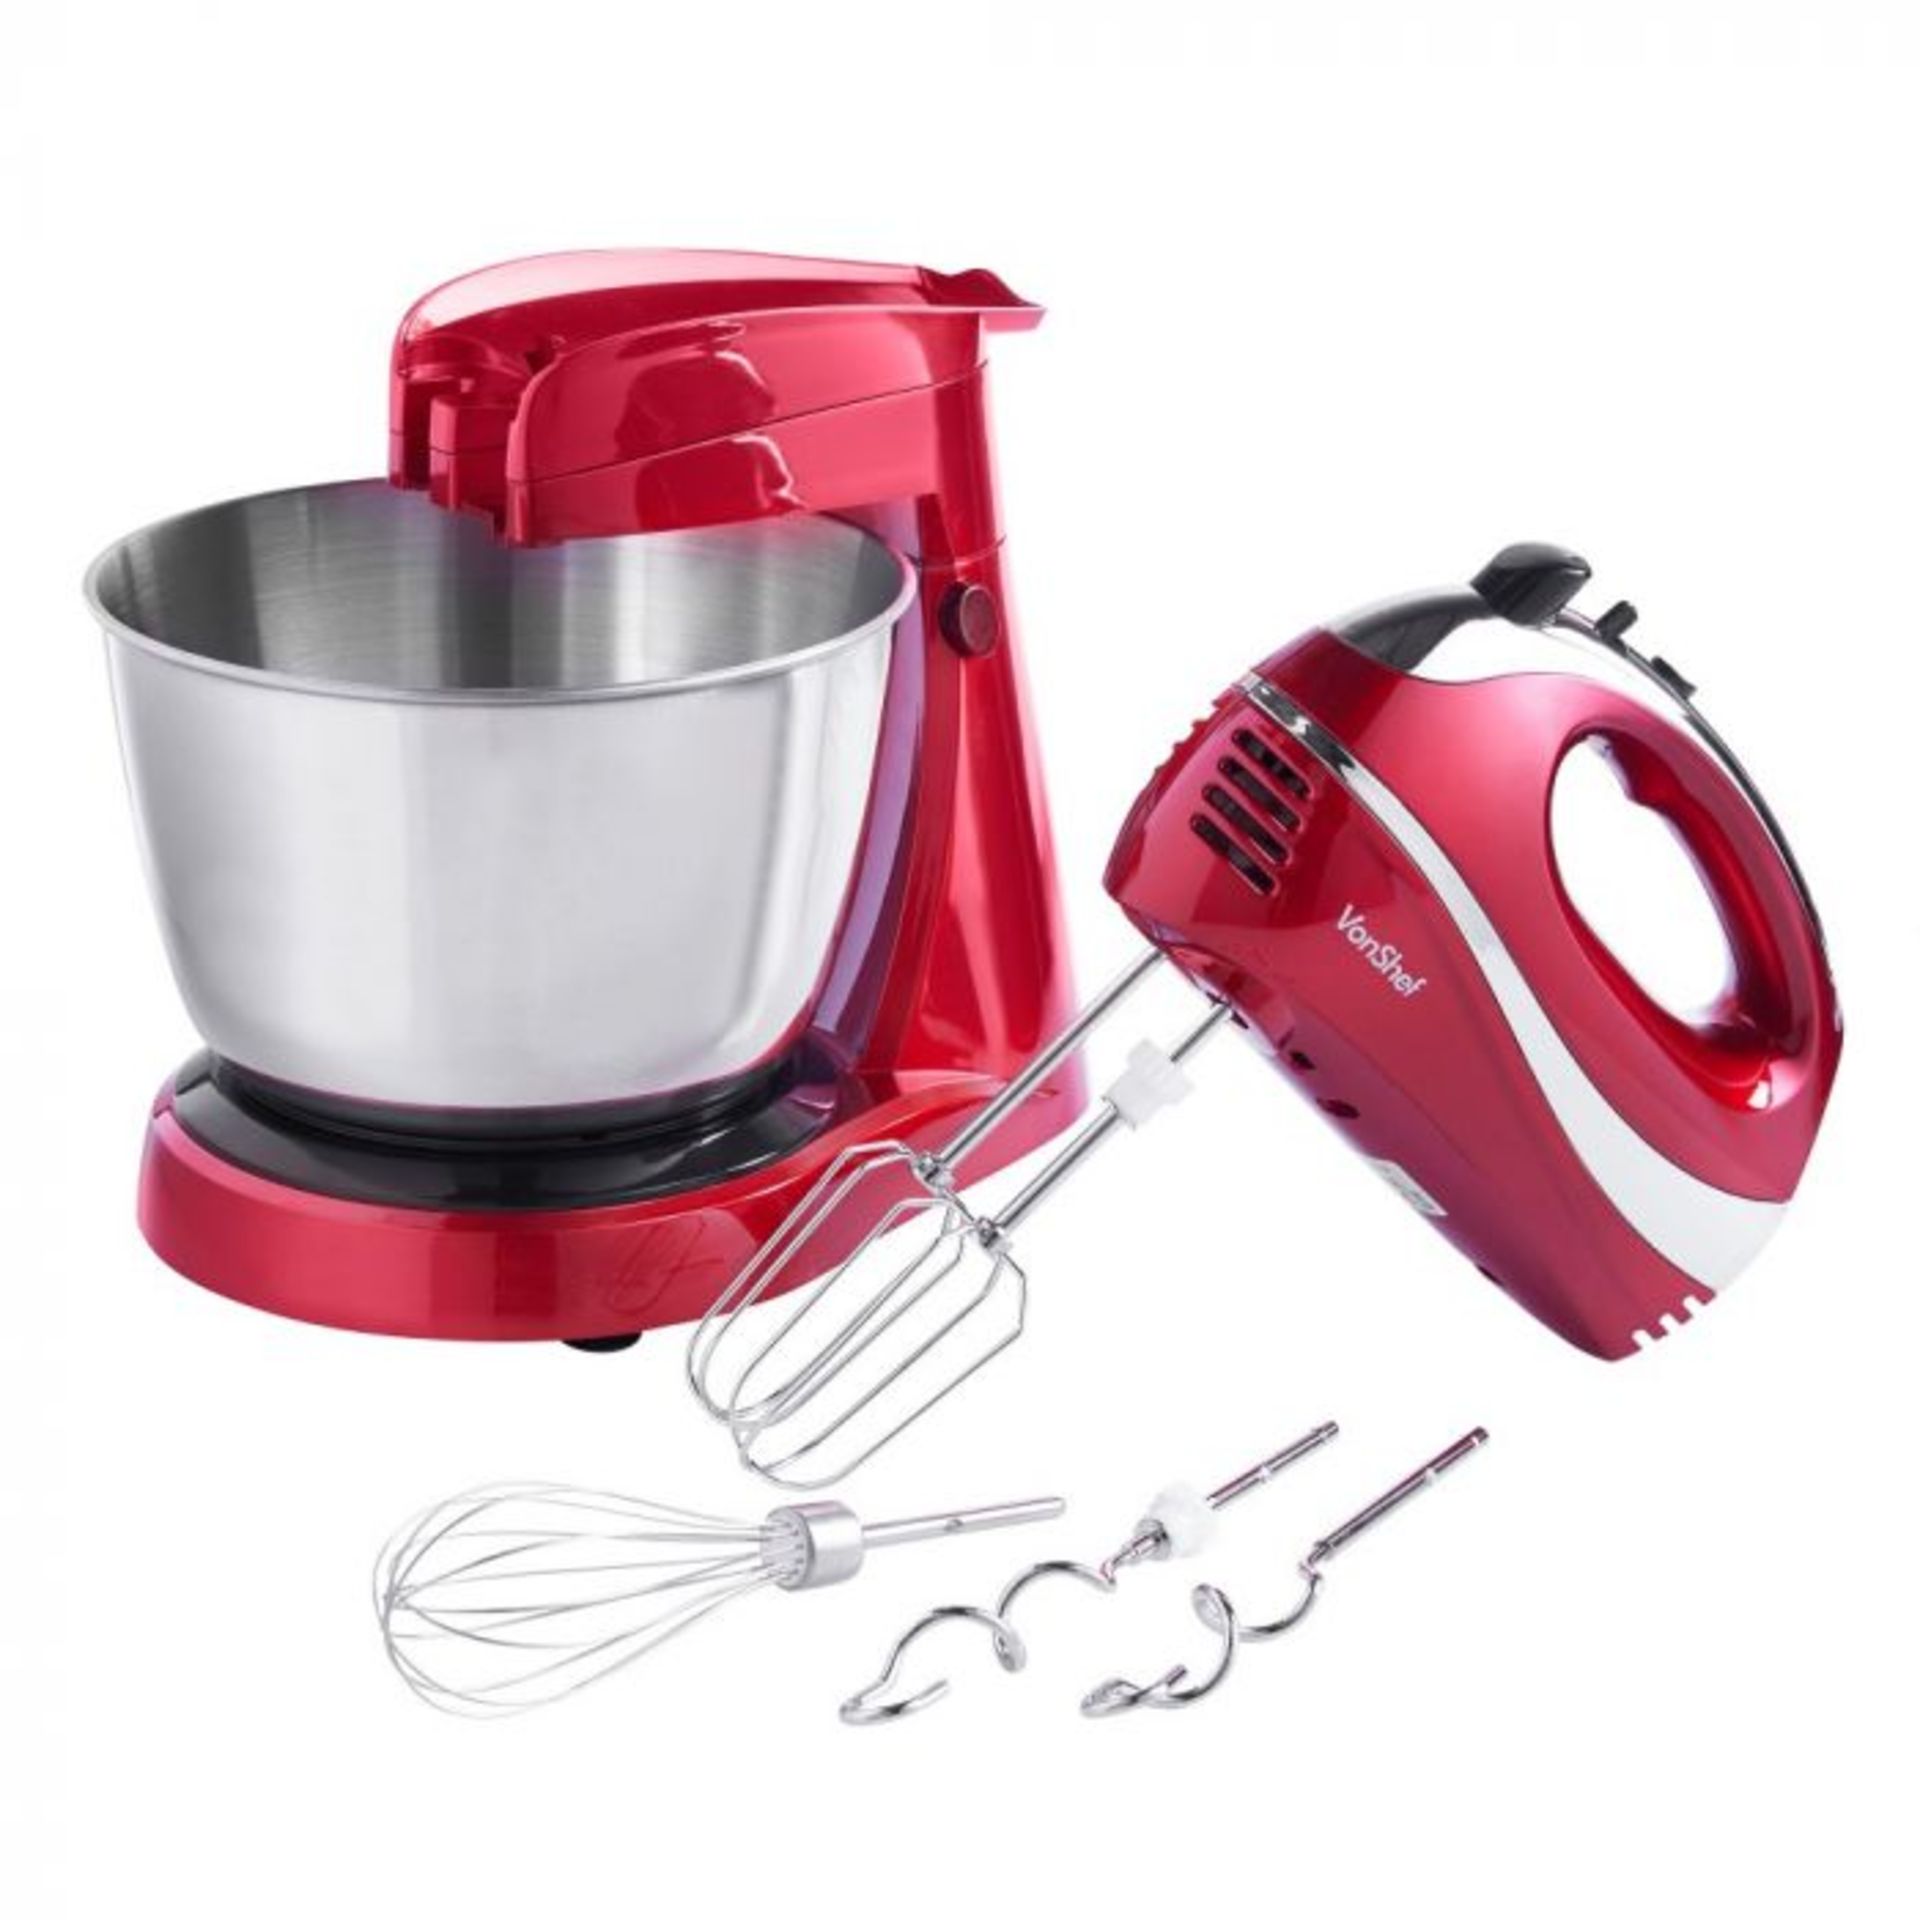 (V187) Red Hand & Stand Mixer The Red stand mixer and hand mixer is a must have kitchen applia... - Image 3 of 3